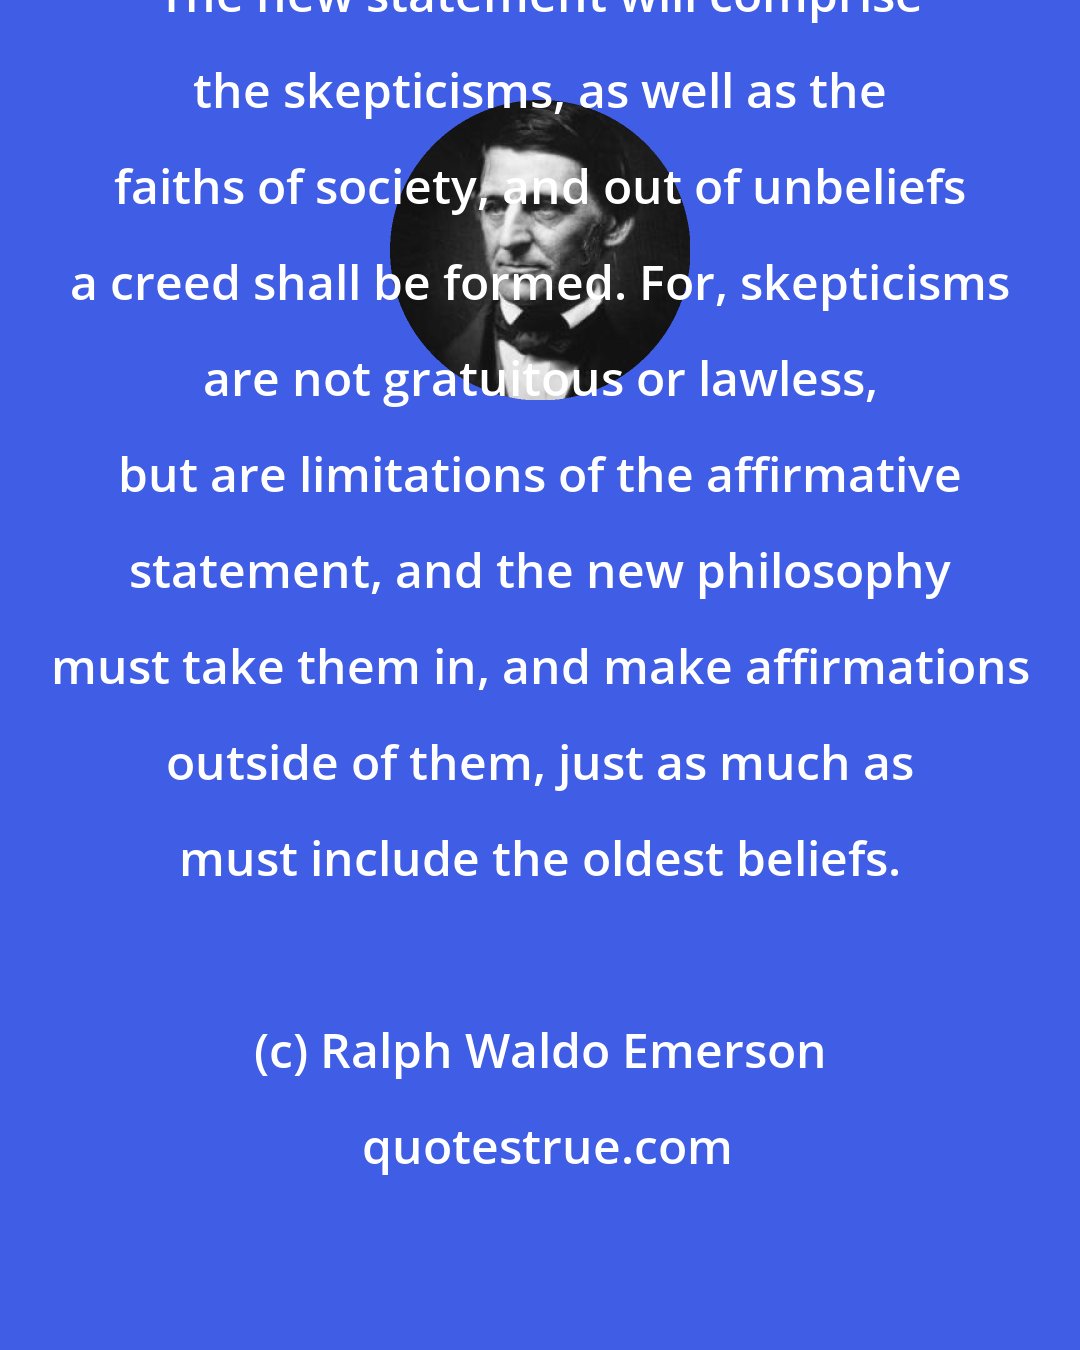 Ralph Waldo Emerson: The new statement will comprise the skepticisms, as well as the faiths of society, and out of unbeliefs a creed shall be formed. For, skepticisms are not gratuitous or lawless, but are limitations of the affirmative statement, and the new philosophy must take them in, and make affirmations outside of them, just as much as must include the oldest beliefs.